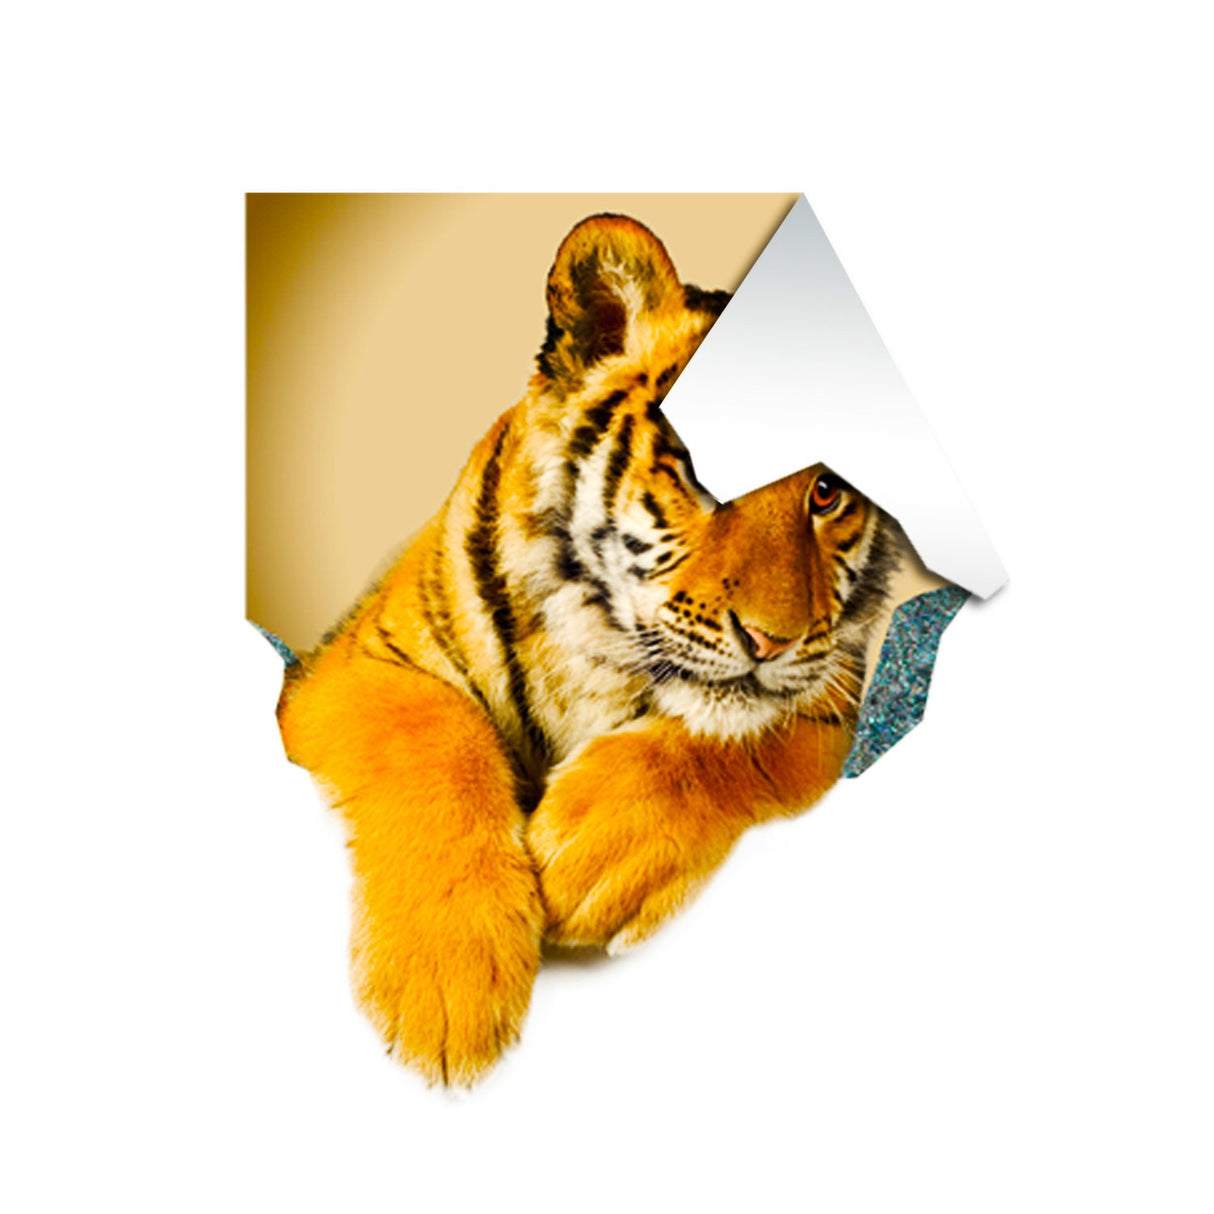 3d Tiger Sticker - Tiger Porthole Decoration Wall Decal For Bedroom